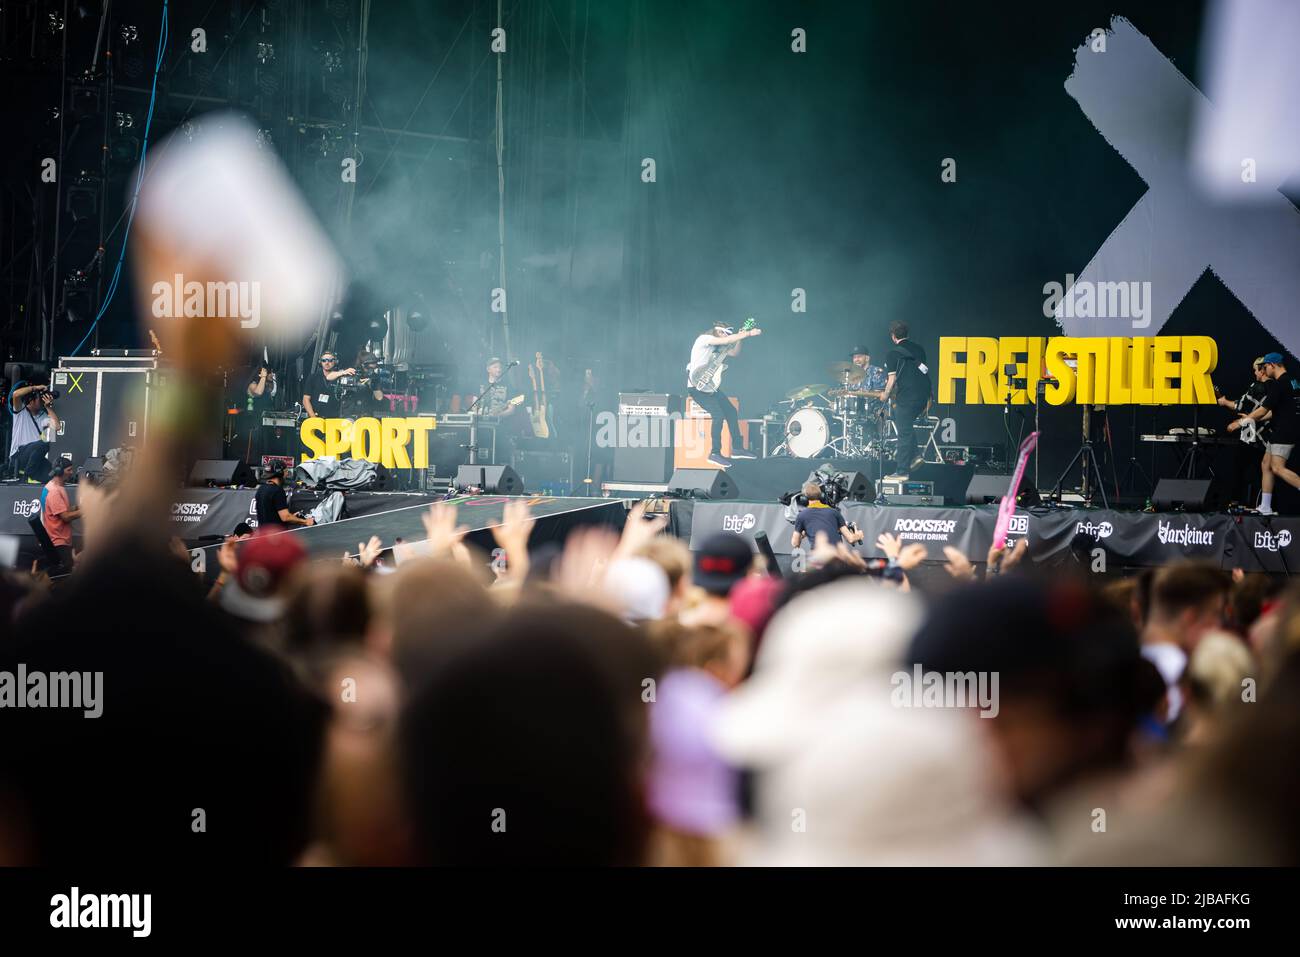 June 4, 2022, Nuerburg, Rhineland-Palatine, Germany: Sportfreunde Stiller on the Utopia Stage at the Rock am Ring music festival 2022 on Friday June 3rd 2022 at the Nuerburgring in Nuerburg, Rhineland-Palatine, Germany. (Credit Image: © Leo Schulz/Alto Press via ZUMA Press) Stock Photo